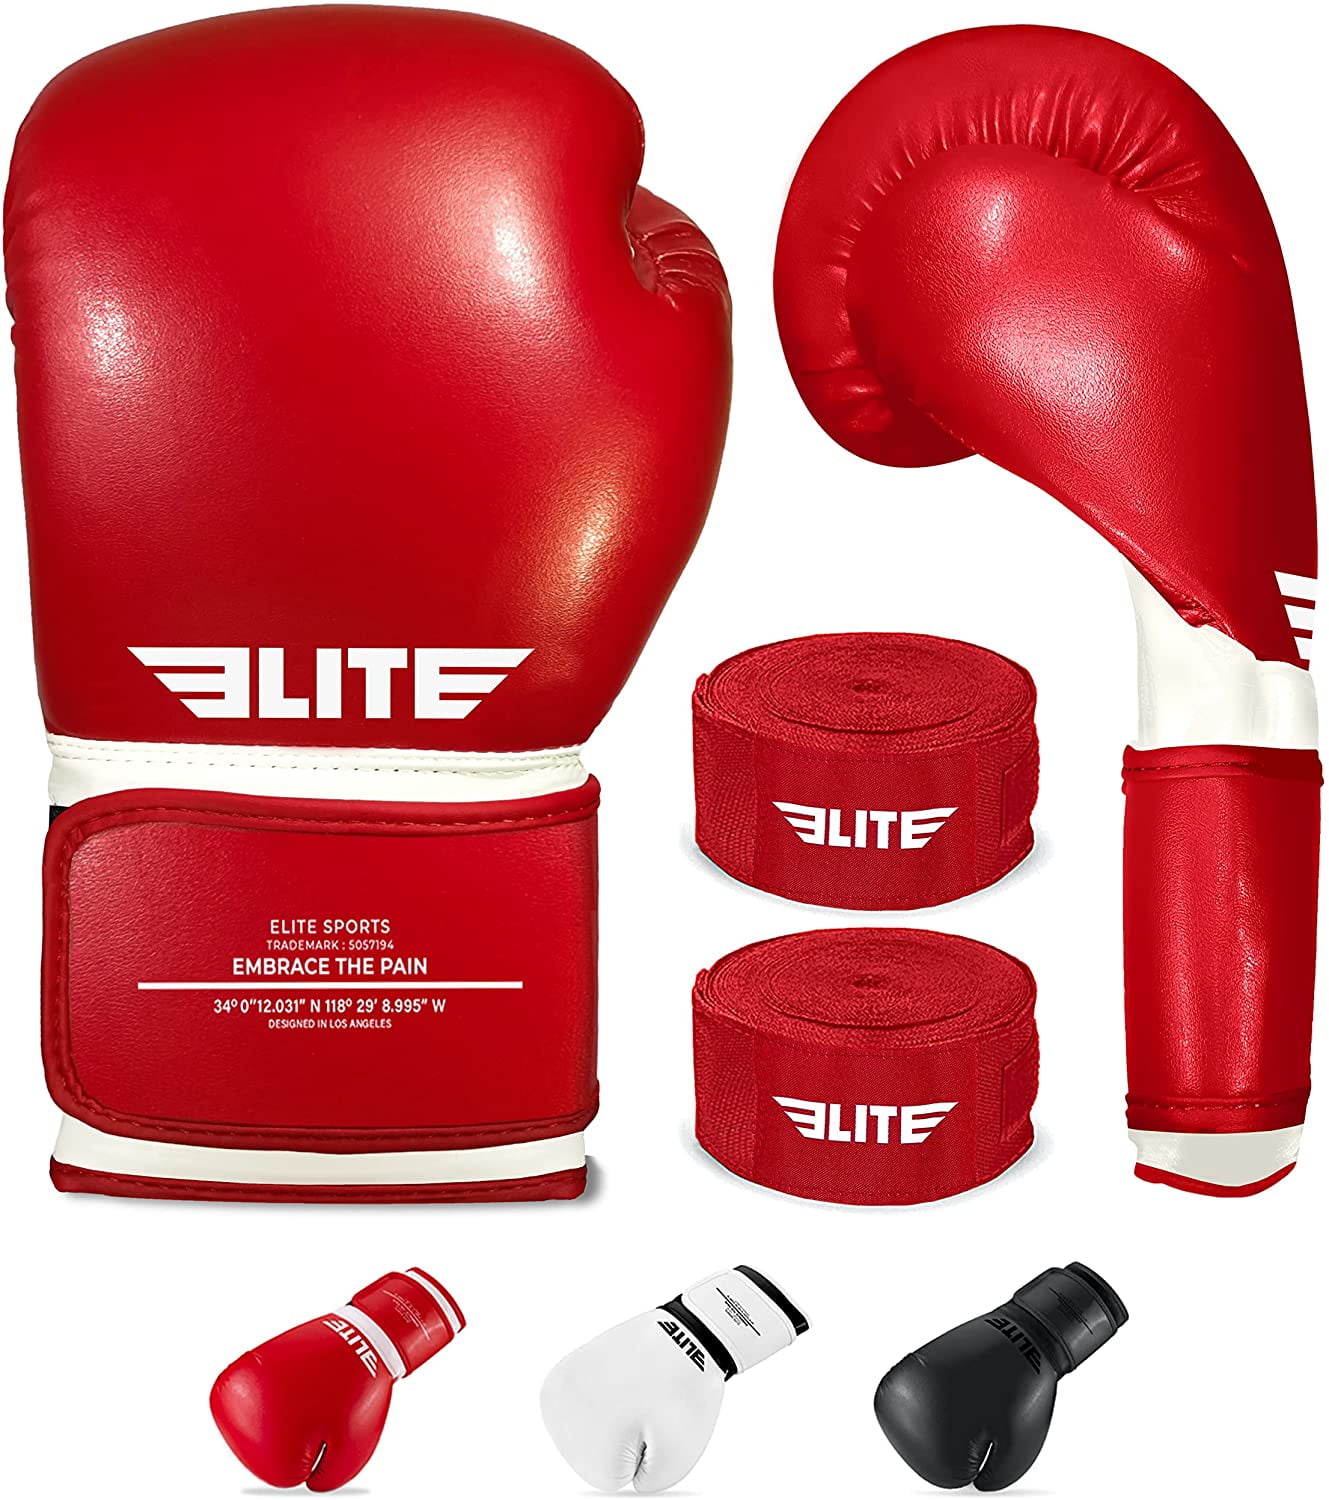 2021 Best Boxing & Kick Boxing Gloves for Men and Women Training & Sparring Gloves for Pro Fighters Complimentary Hand Wraps and Mesh Bag 